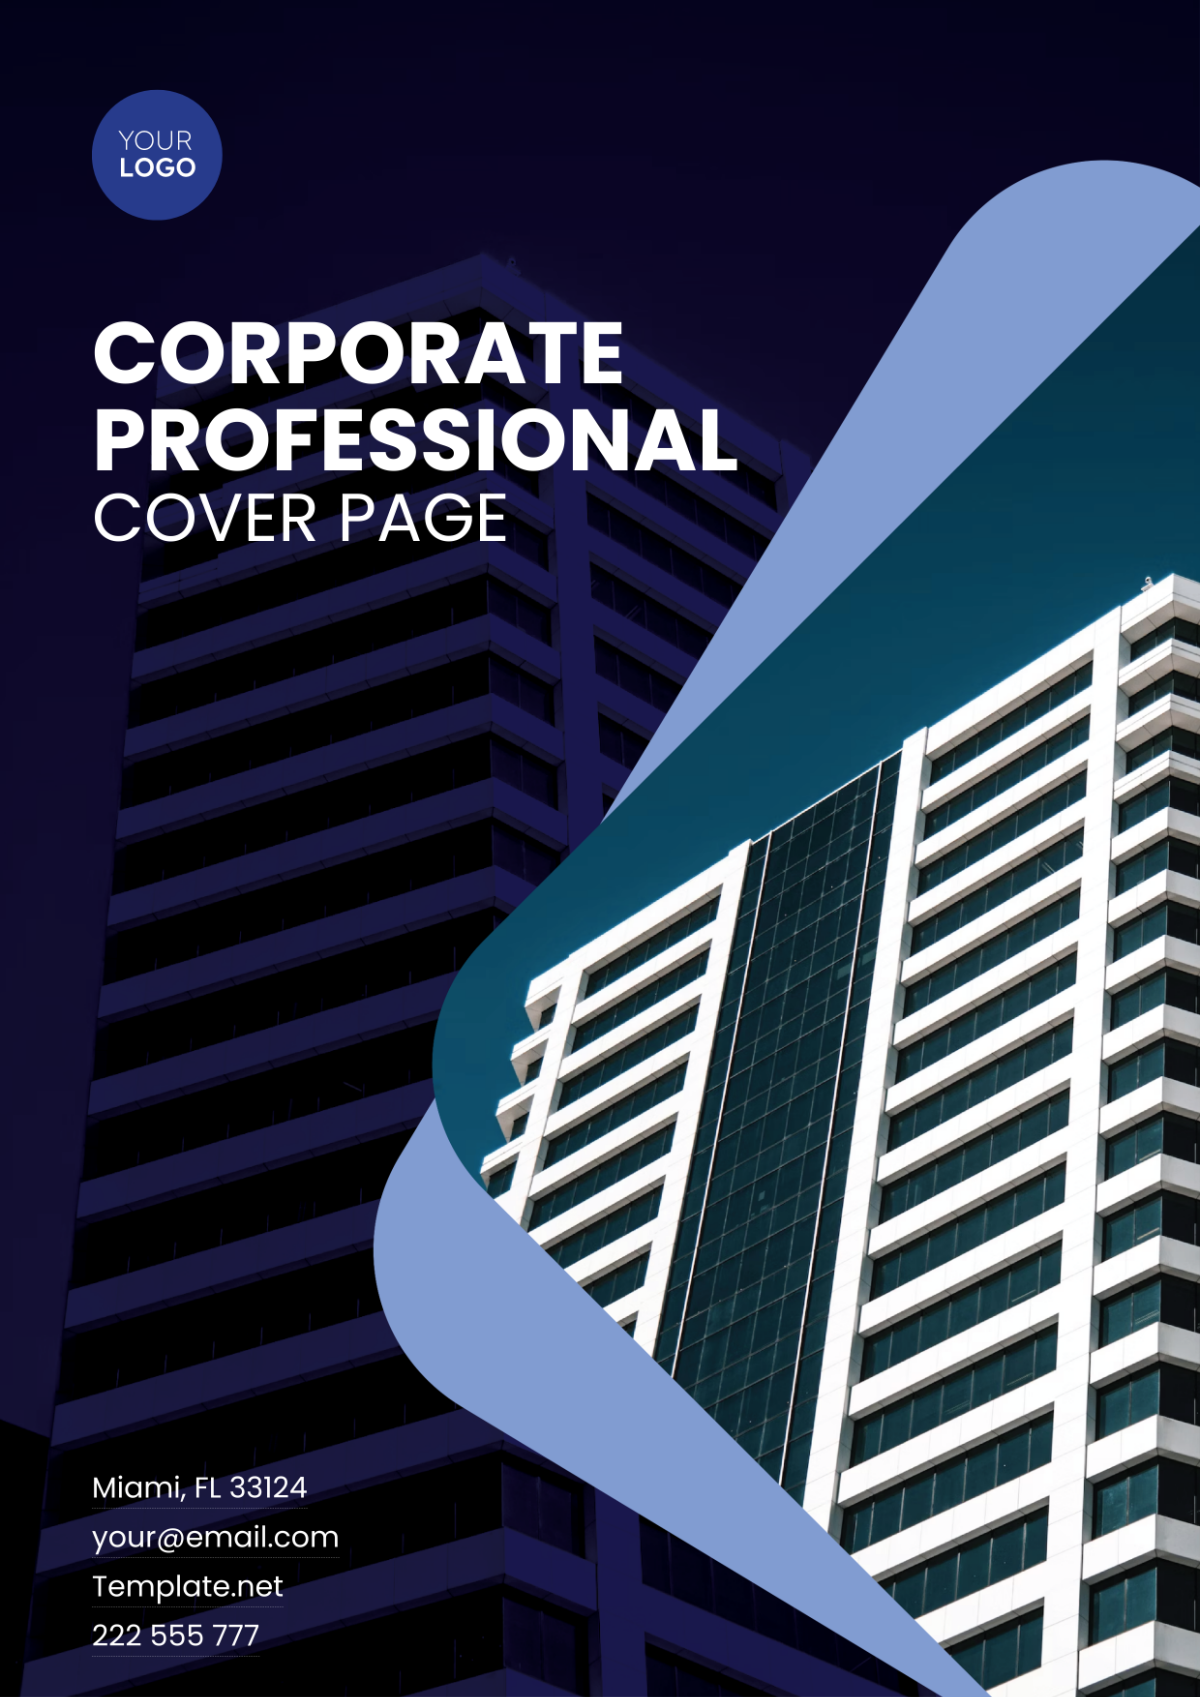 Corporate Professional Cover Page Template